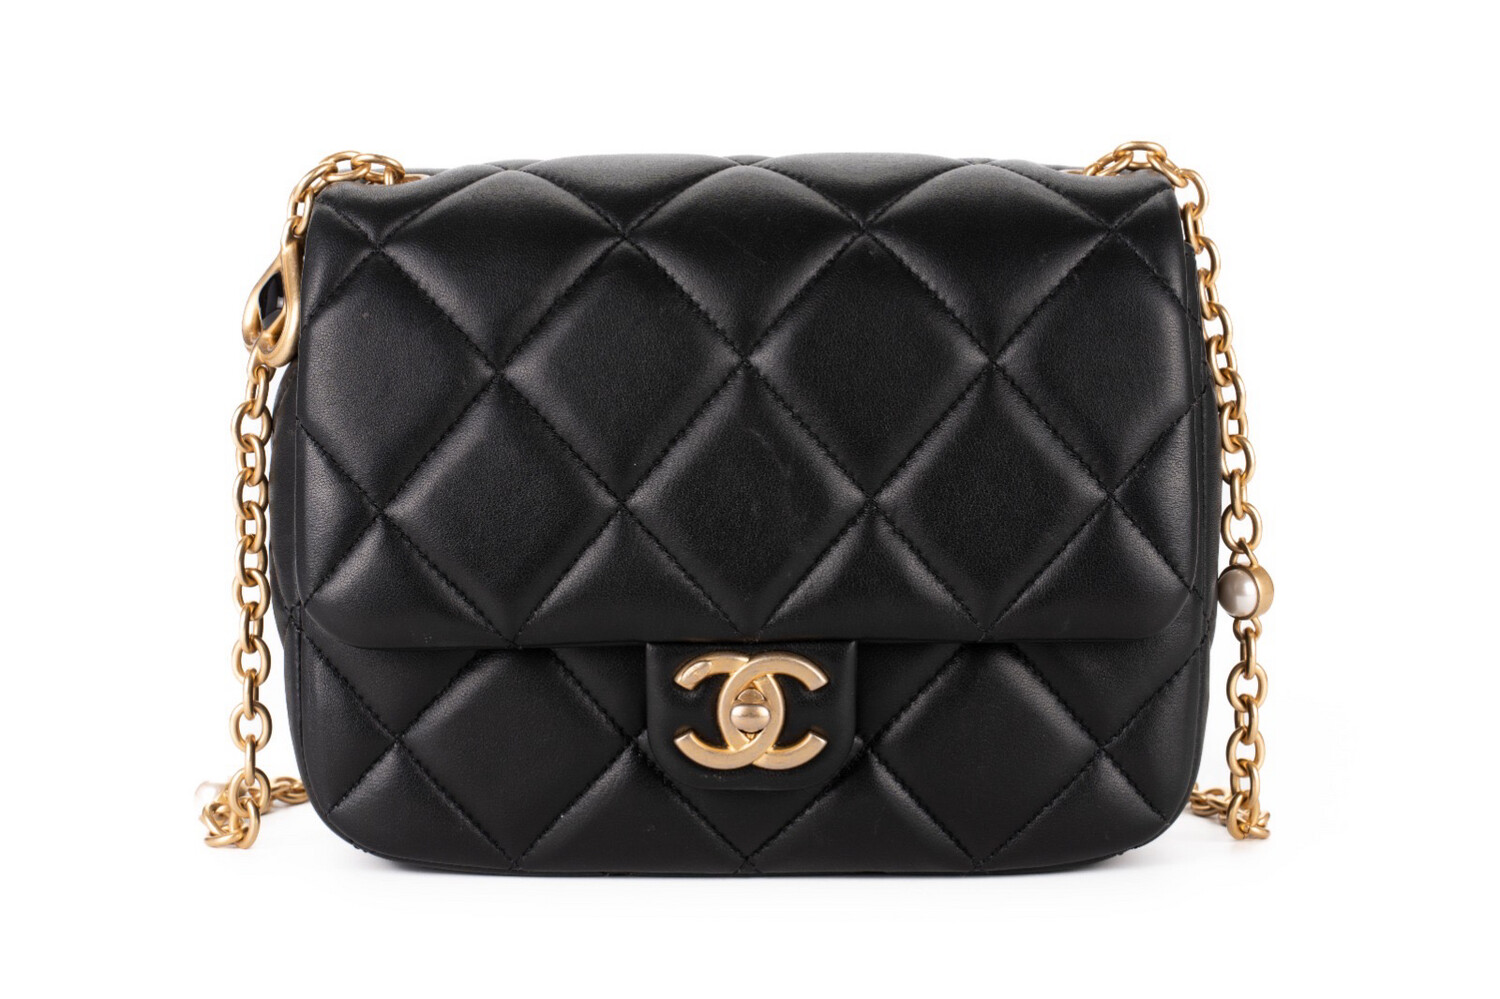 Chanel Seasonal Heart Bag, Black With Pearl Chain, Preowned In Box